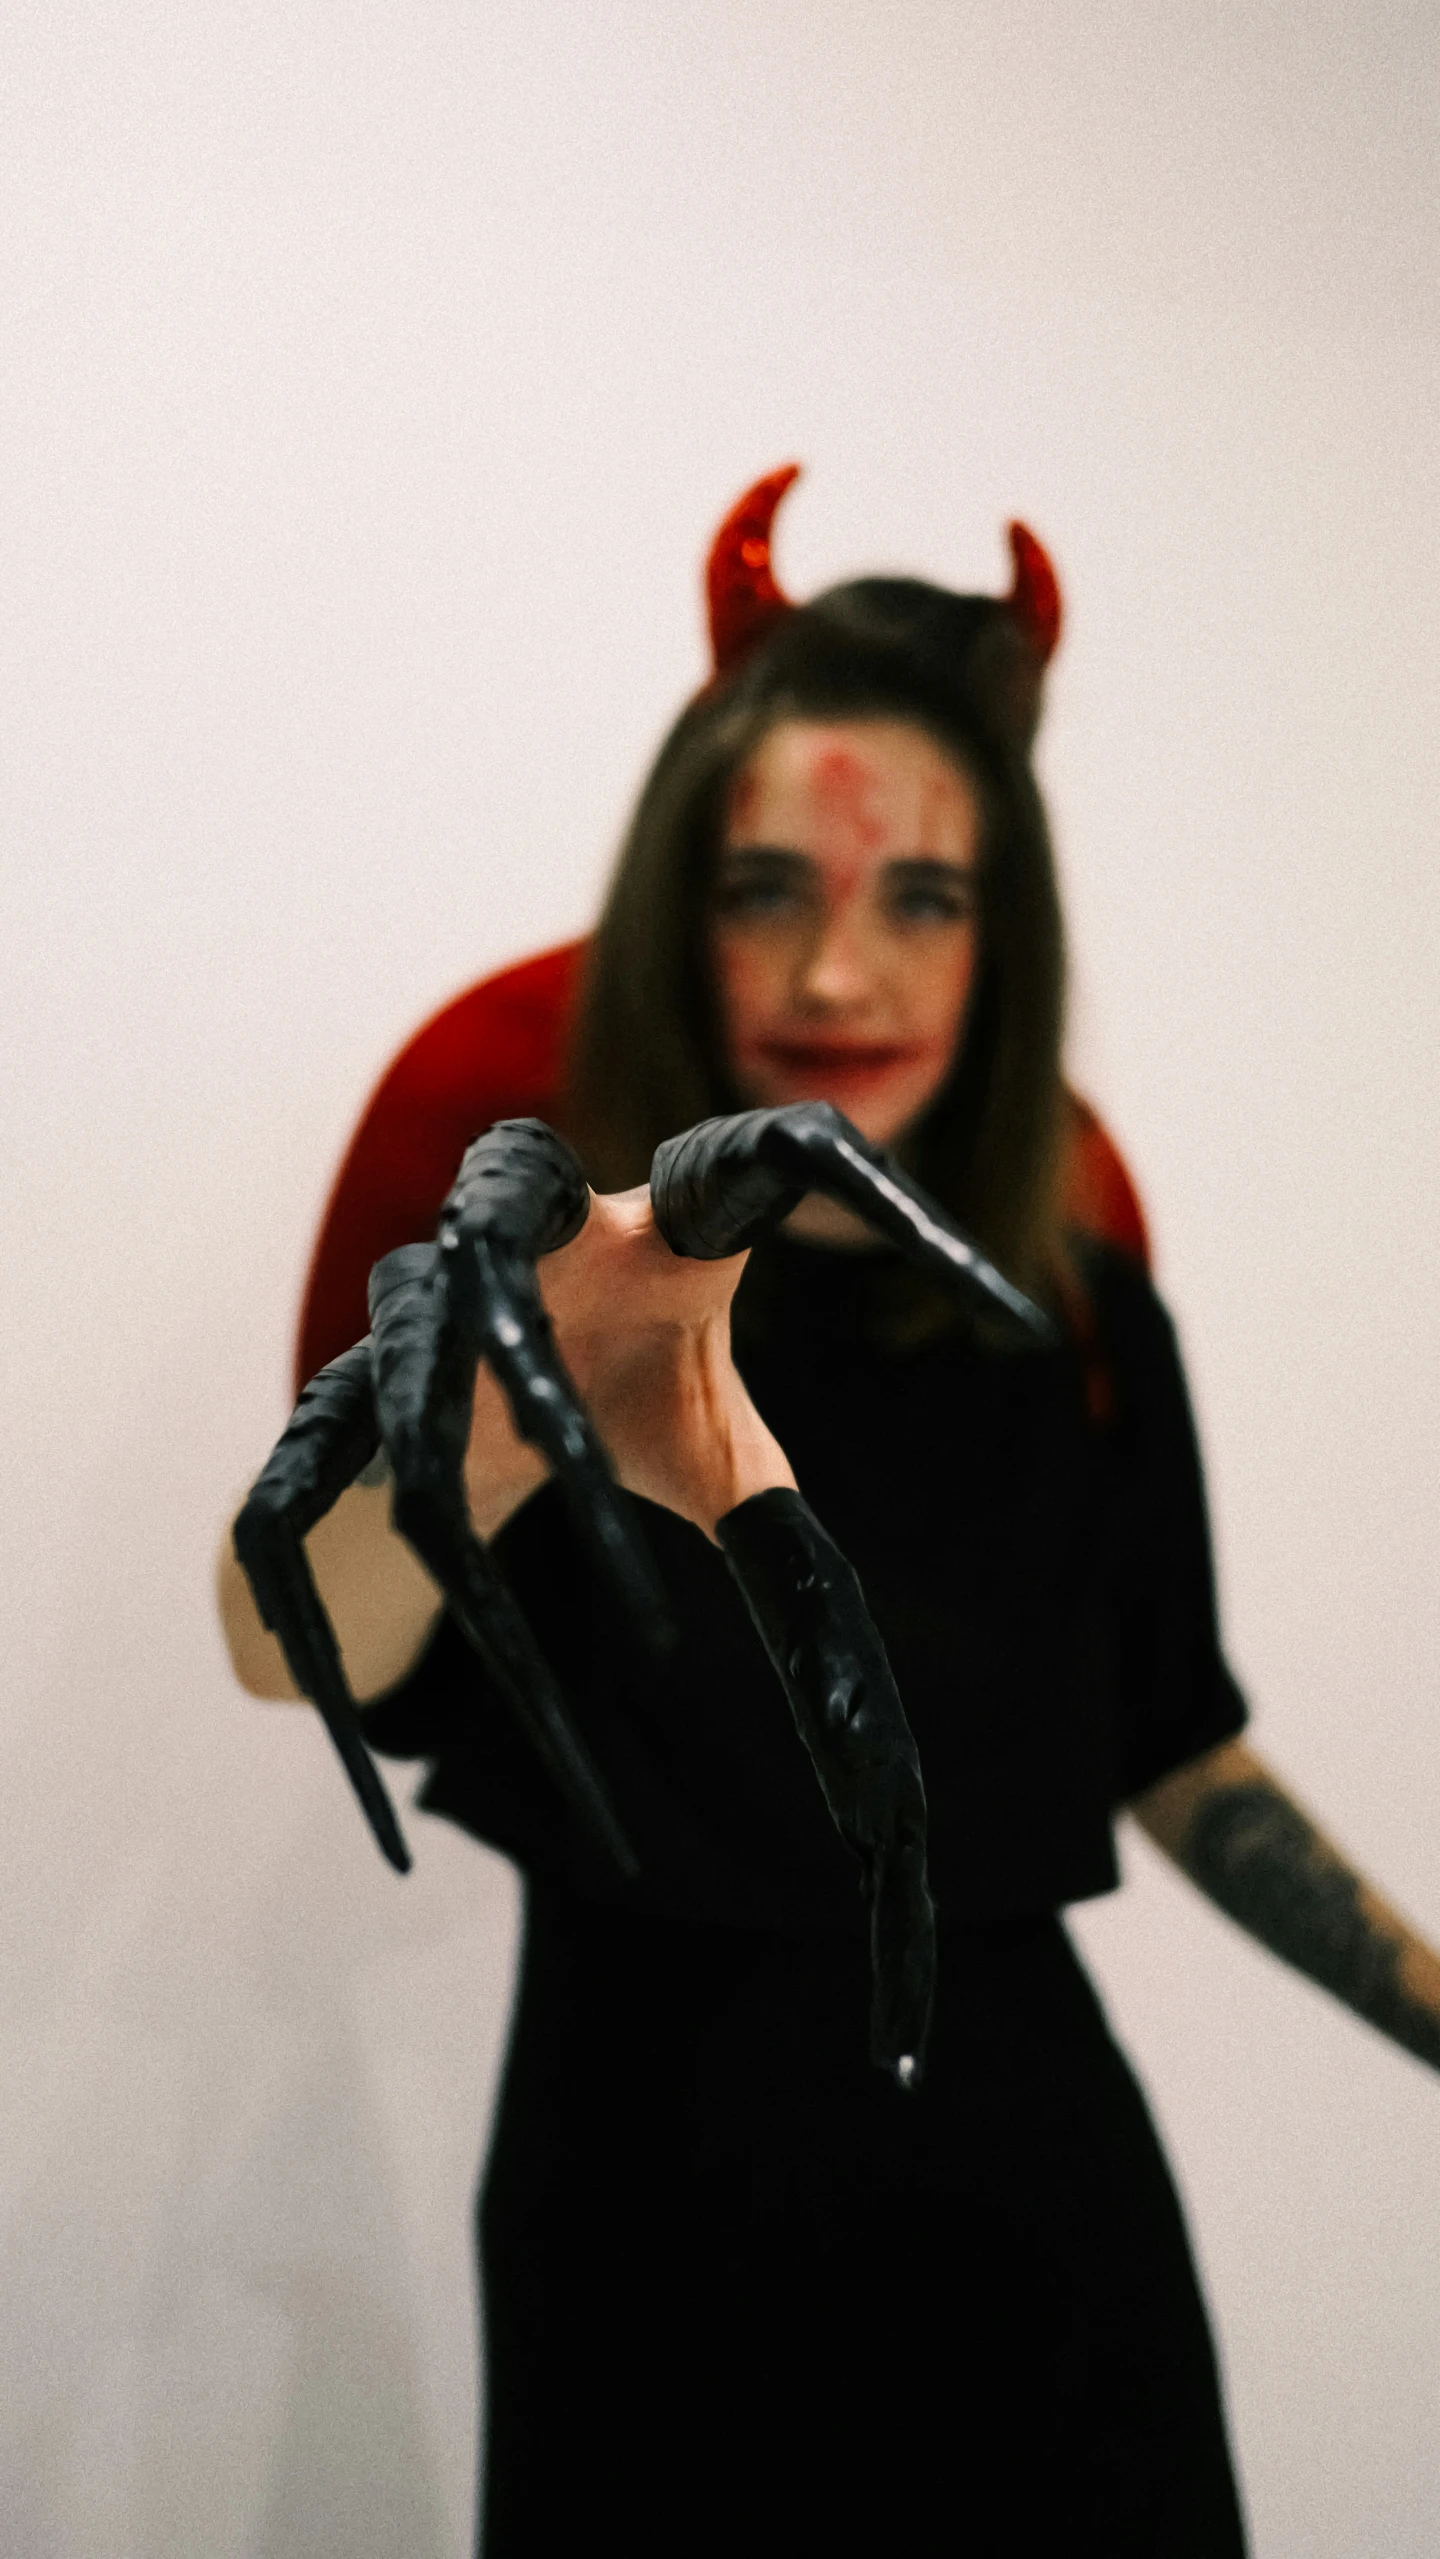 a woman with horns is shown holding two scissors